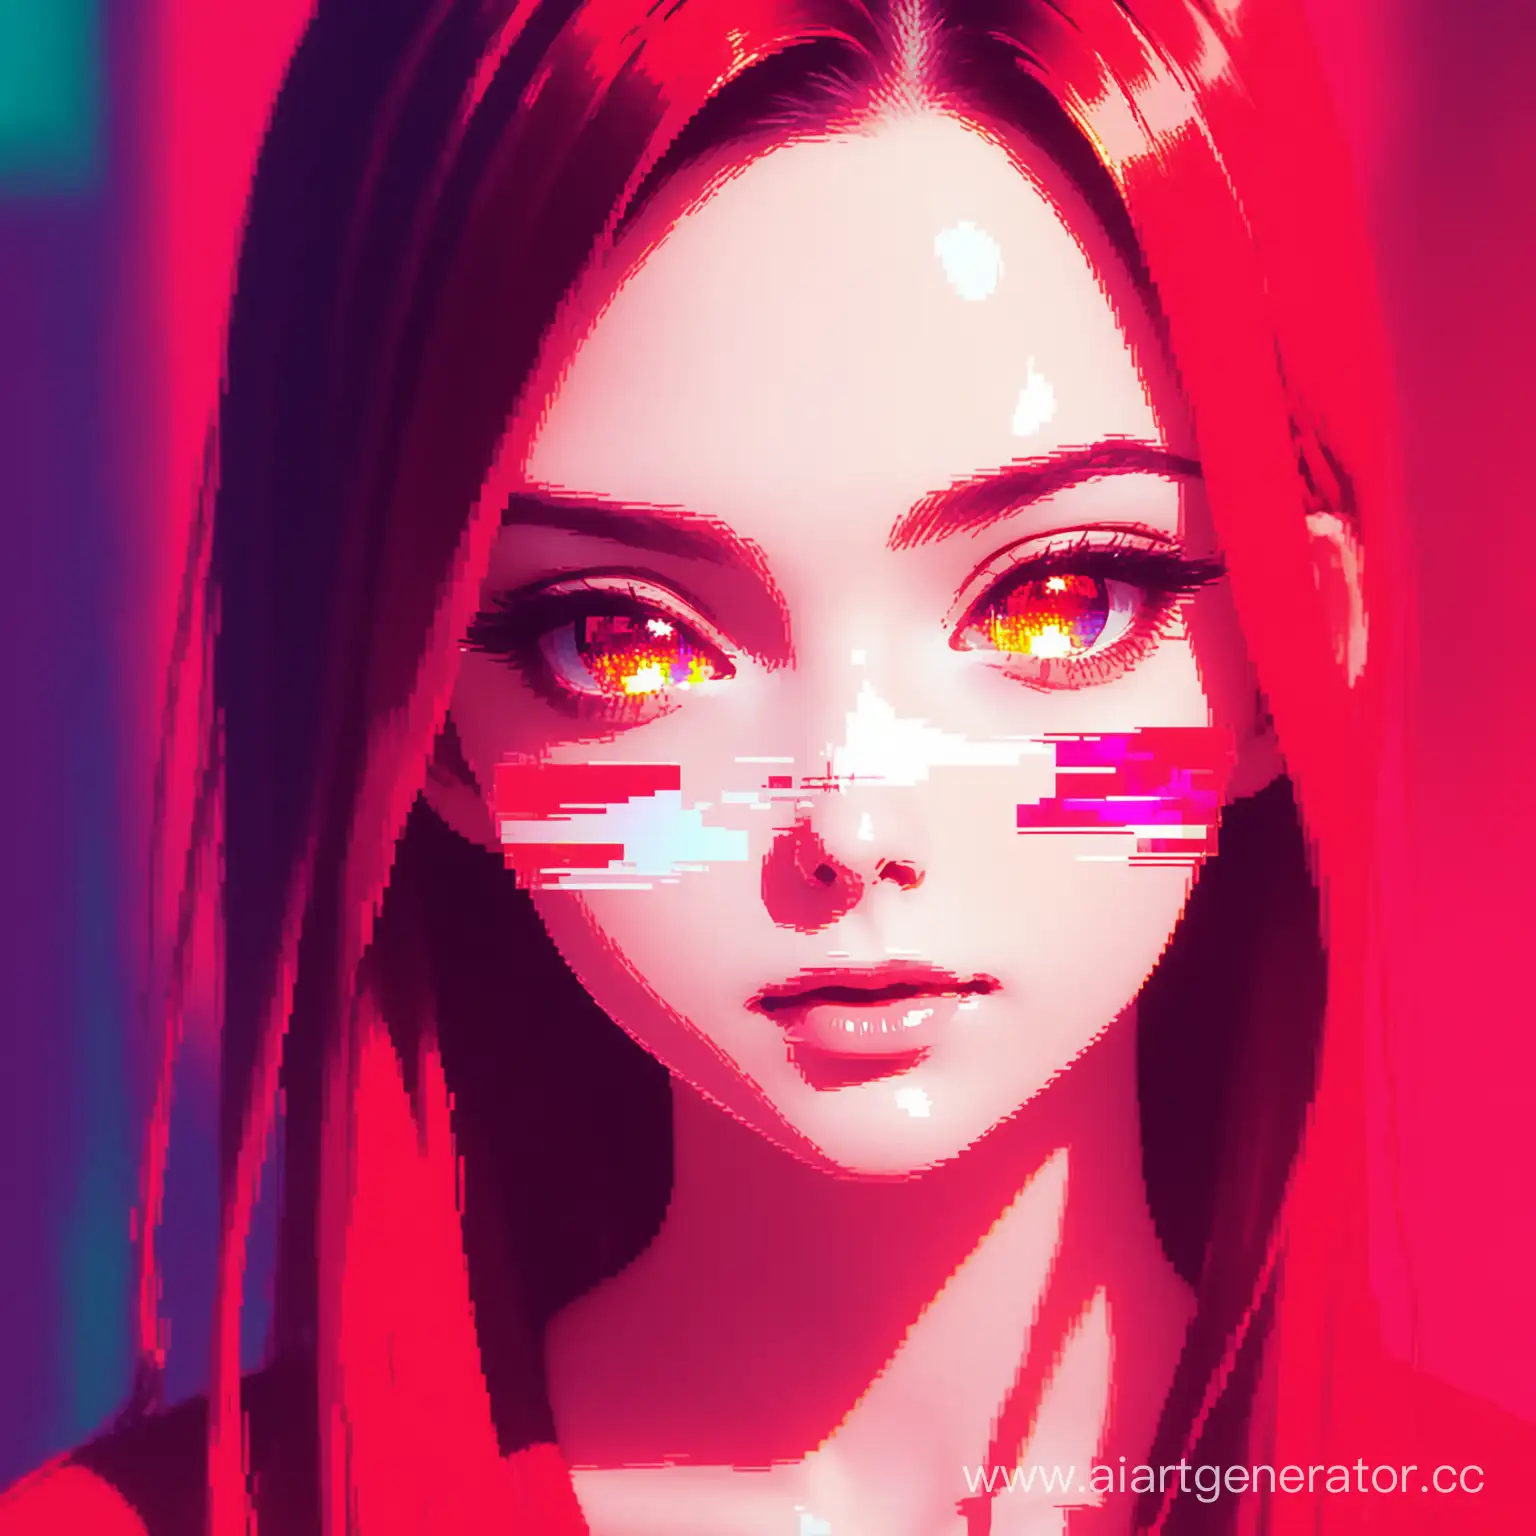 Retro-Glitch-Portrait-Beautiful-Girl-with-VHS-Filter-and-Video-Game-Effects